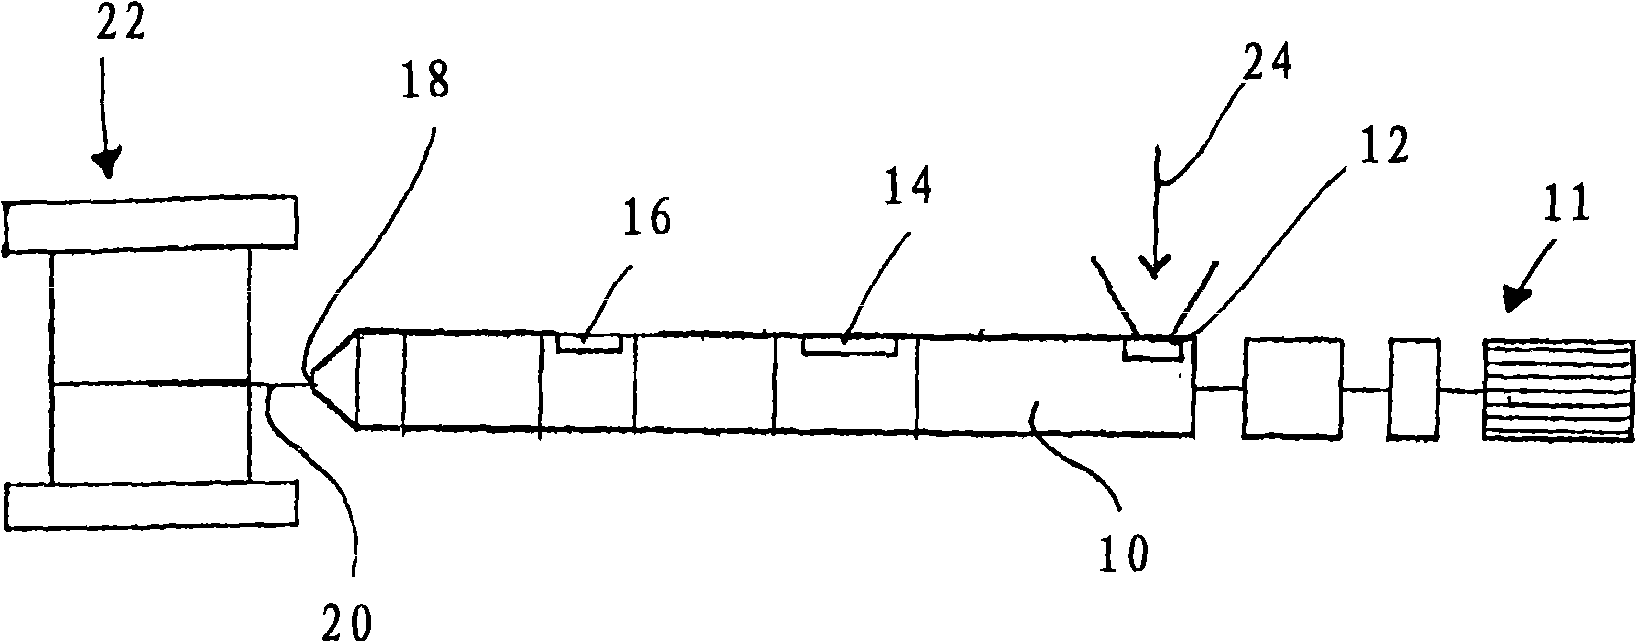 Device and method for processing thermosetting plastics